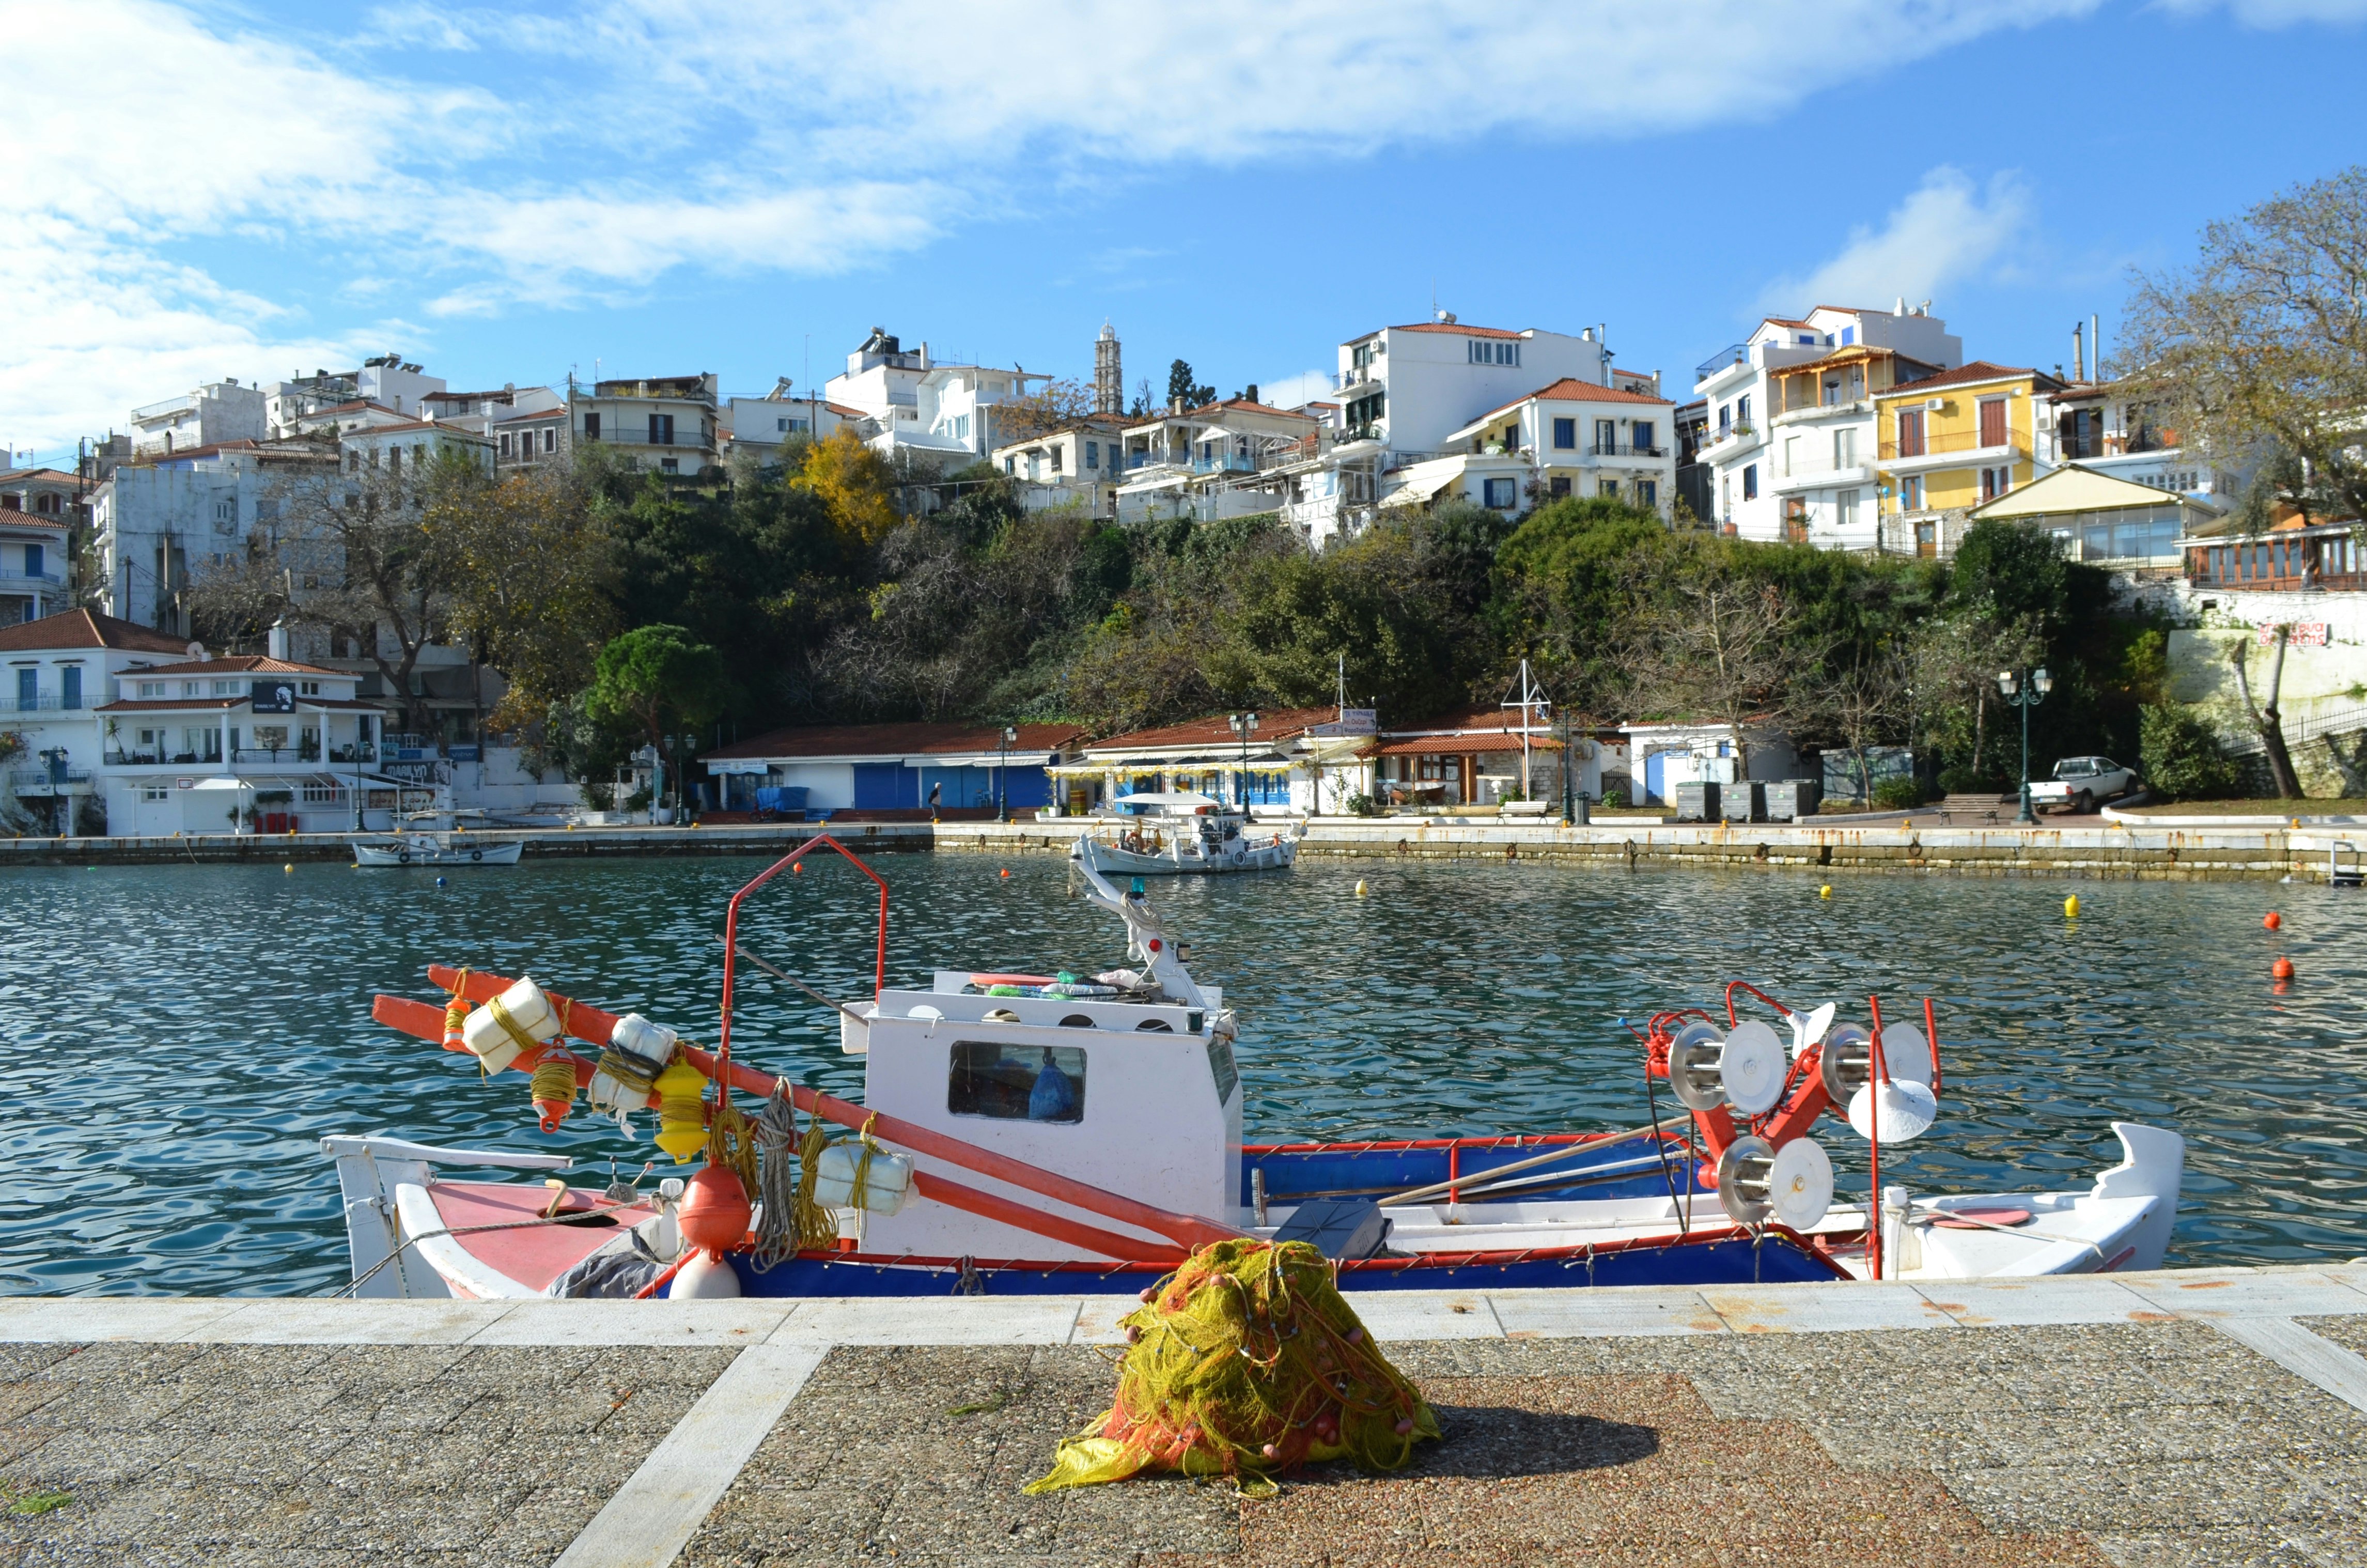 Travel News - The Old Port of Skiathos in the Sporades.